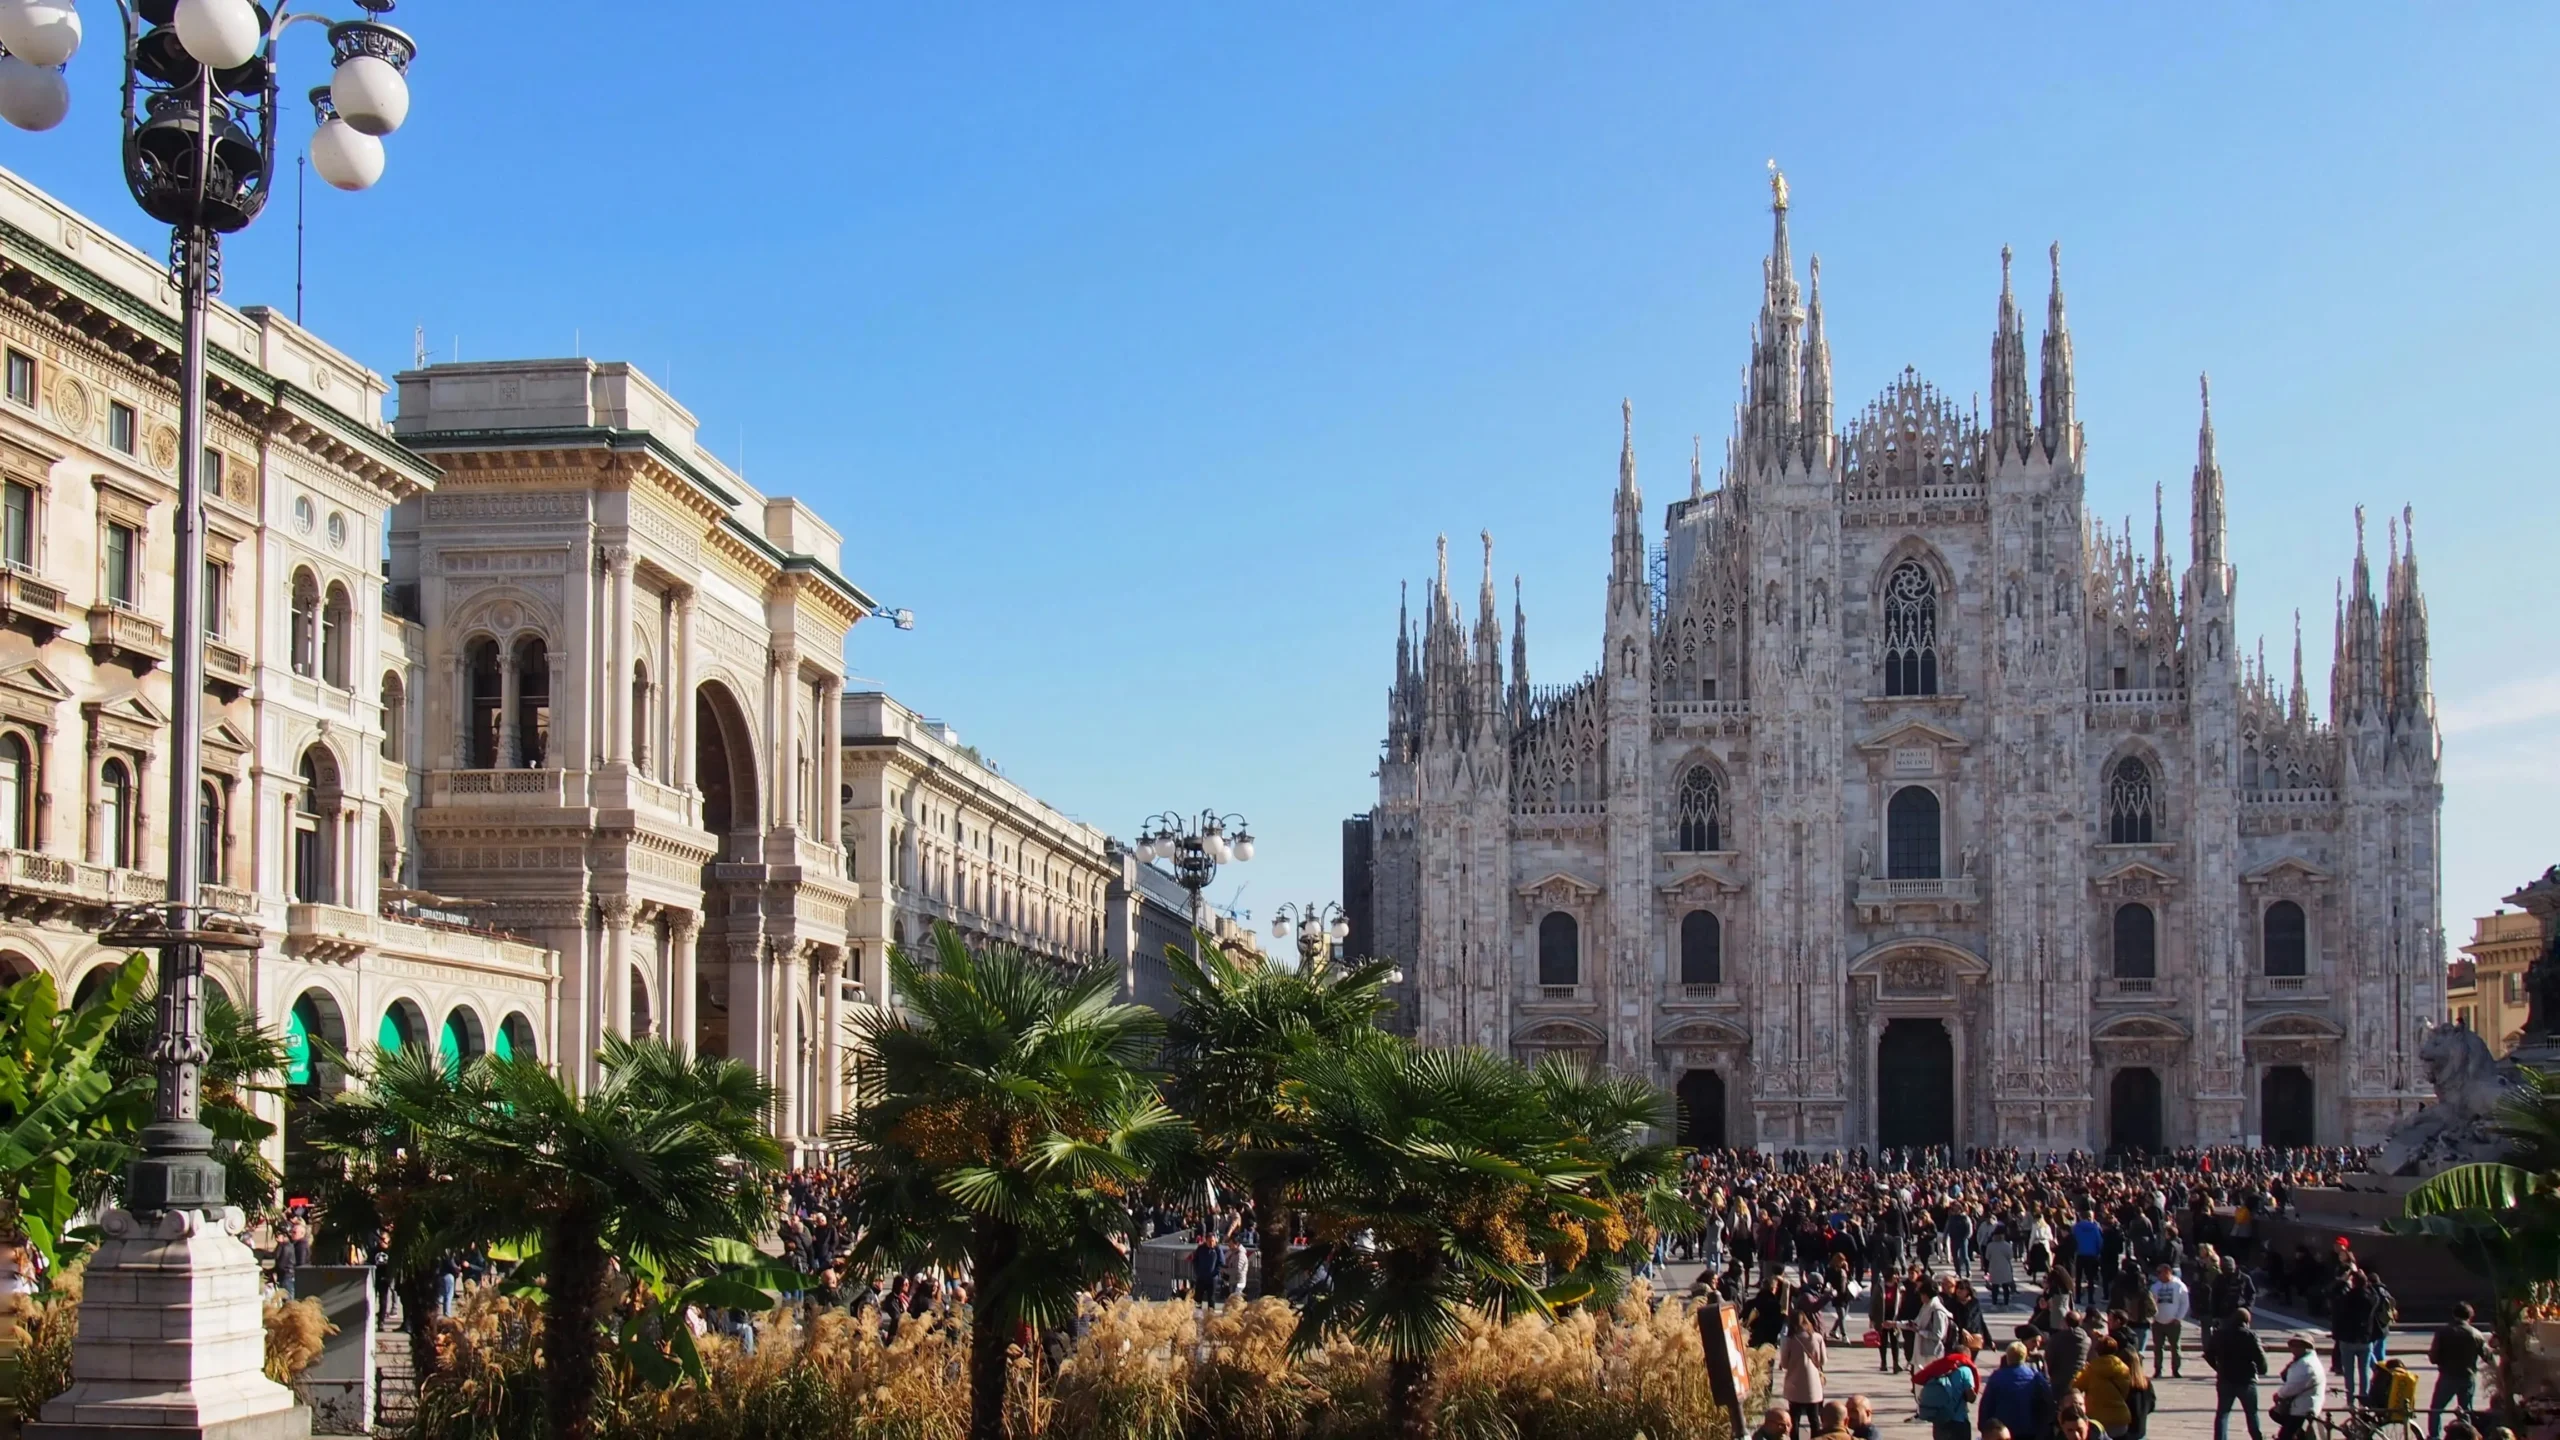 View of Piazza Duomo in Milan. In this picture, you can see the Milan Cathedral and the Galleria Vittorio Emanuele II.